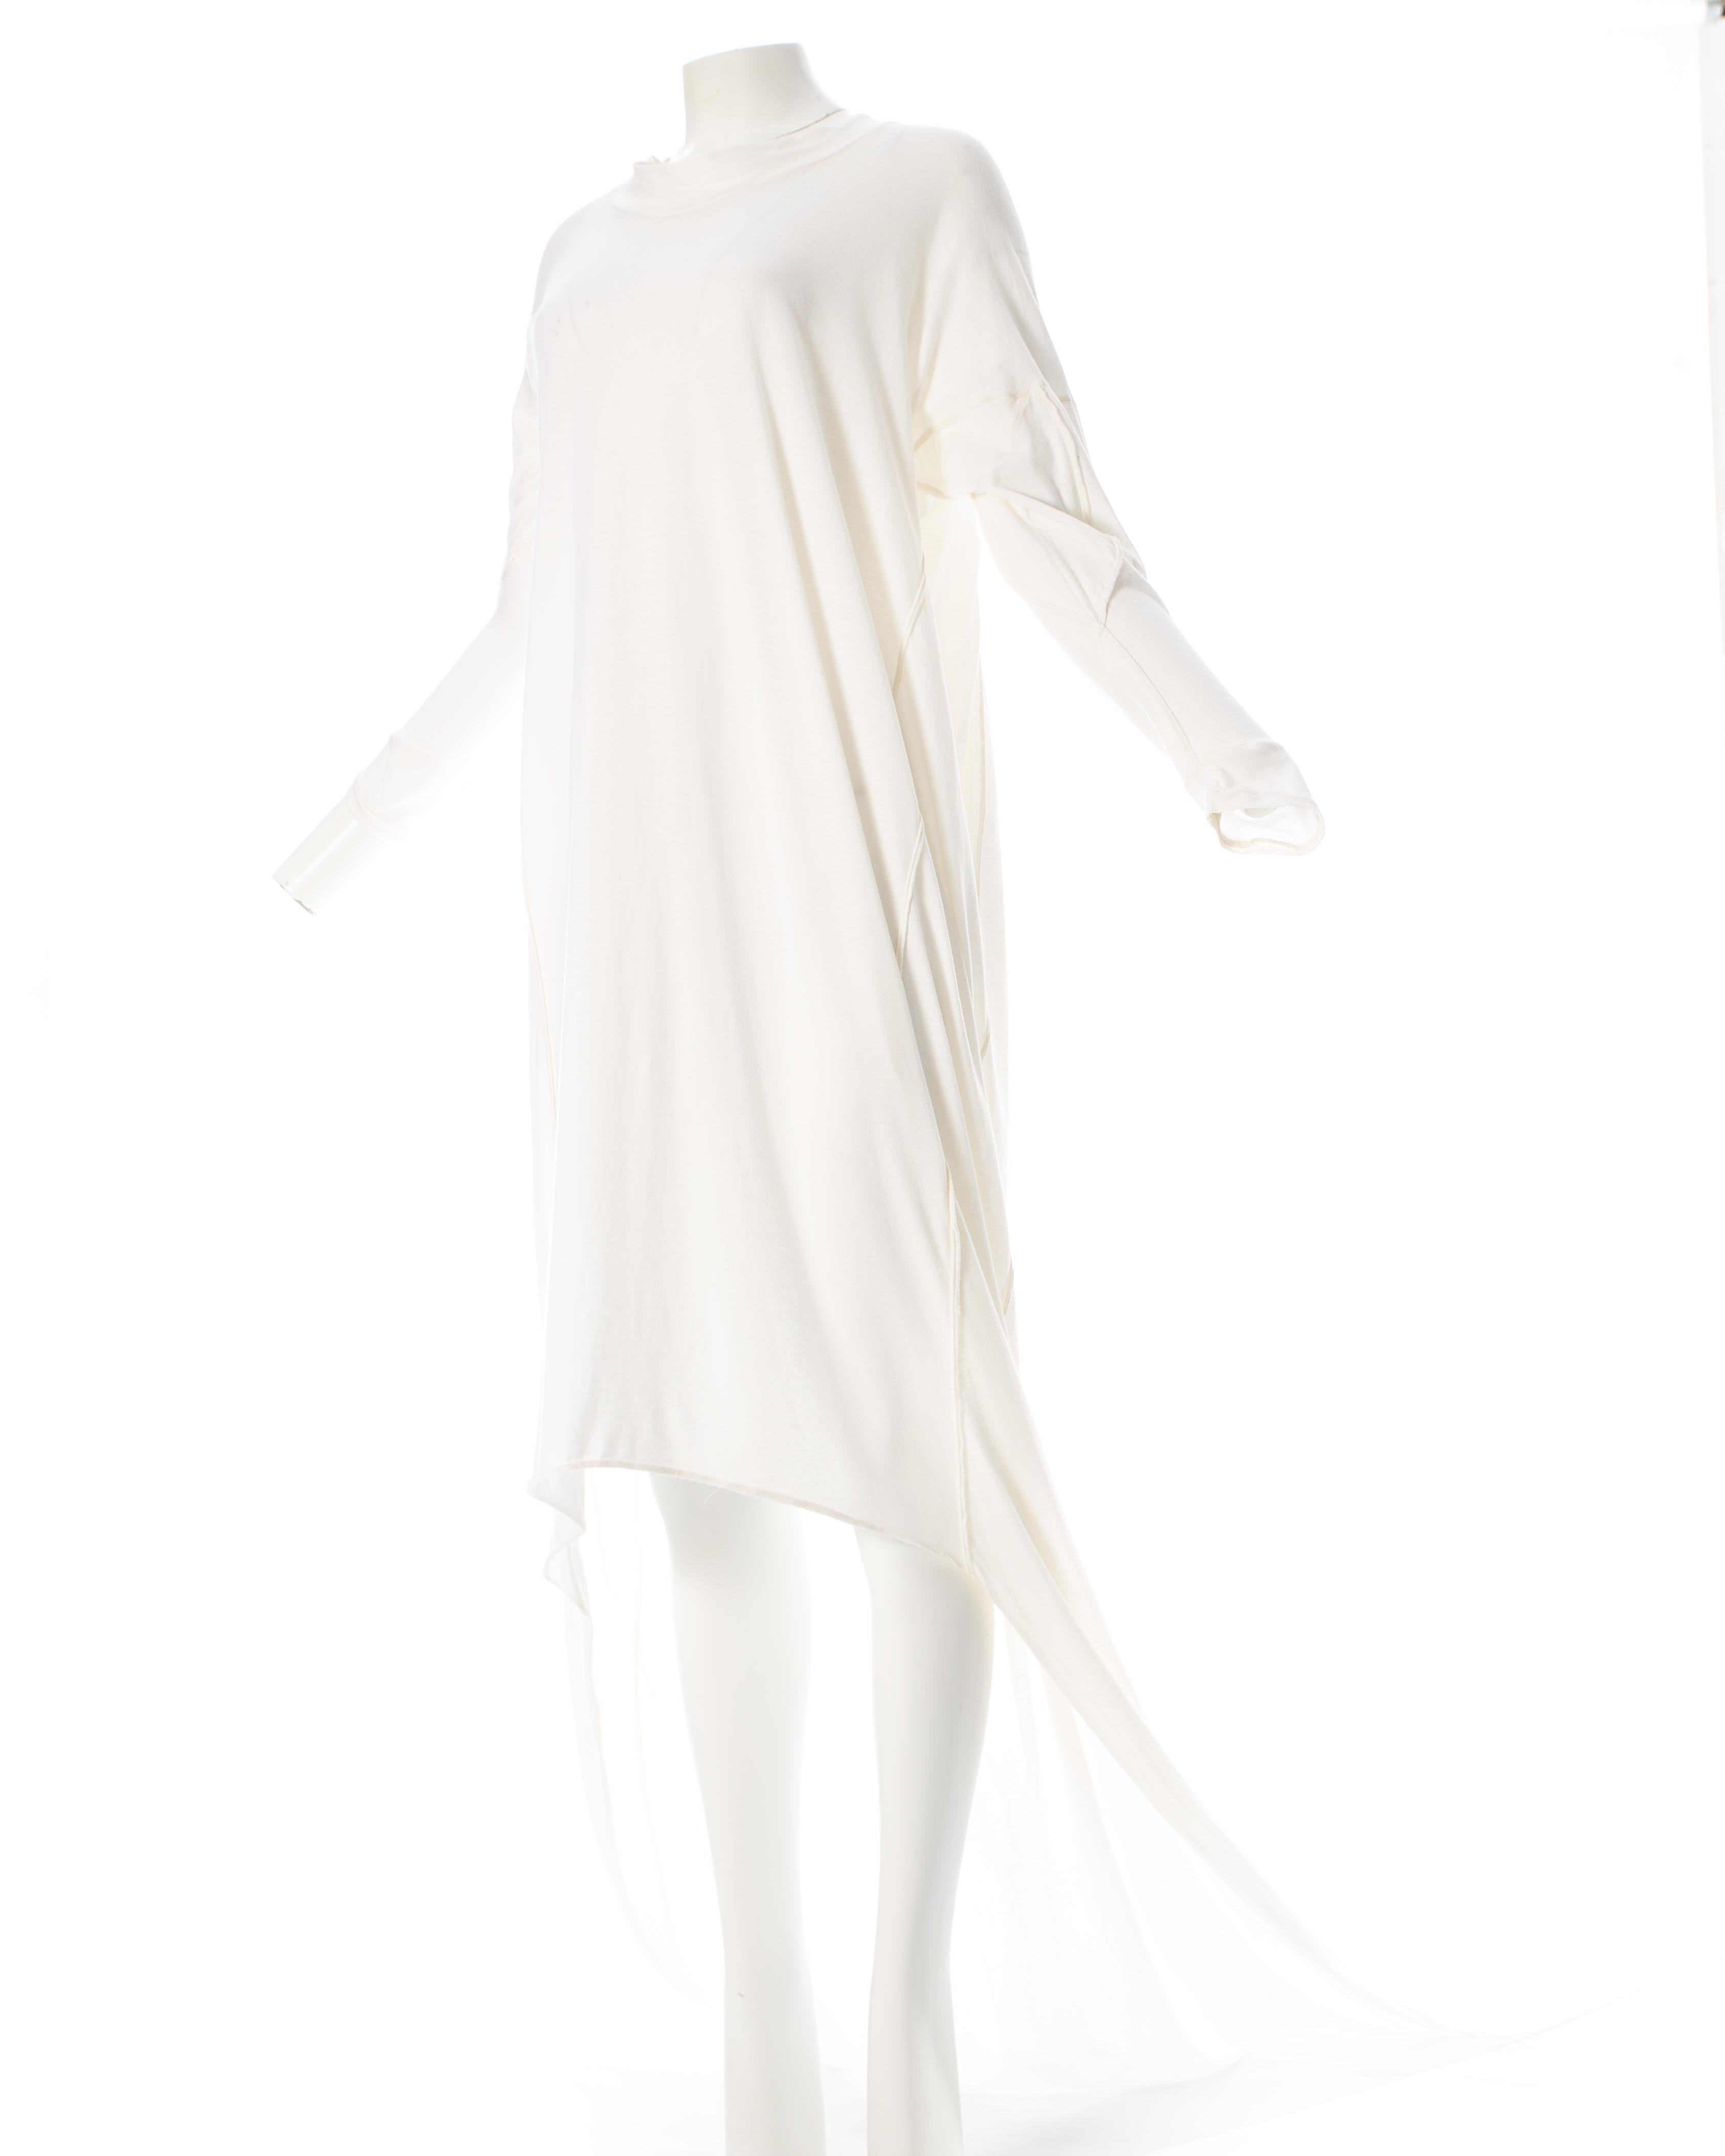 White Worlds End by Vivienne Westwood and Malcolm McLaren Cotton Toga Dress, fw 1982  For Sale